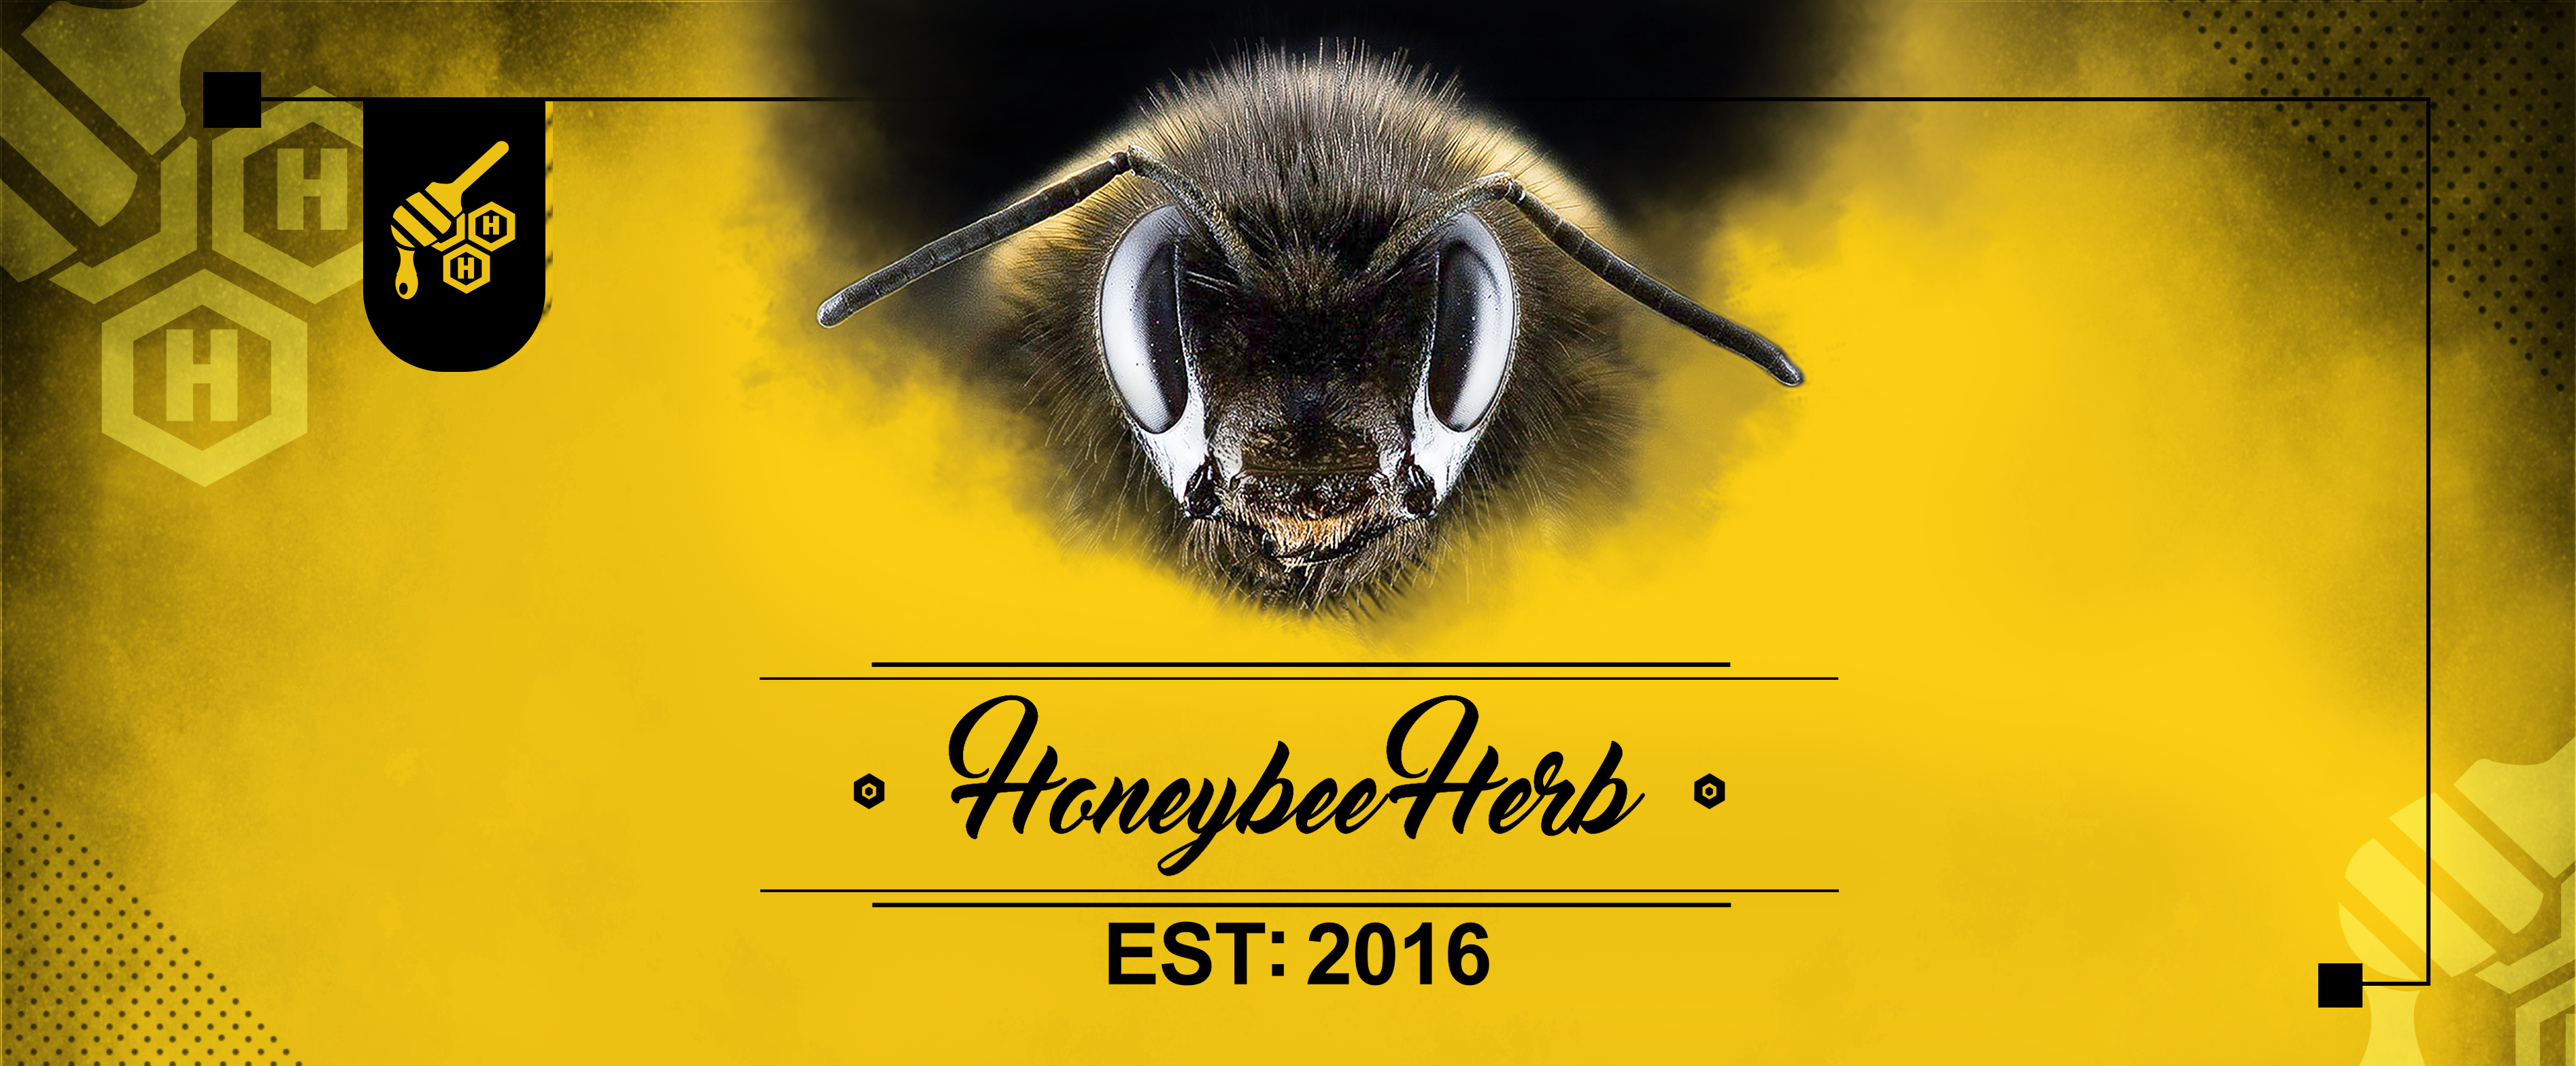 What Is A Dab Mat? All Answers About Your Thinking – Honeybee Herb